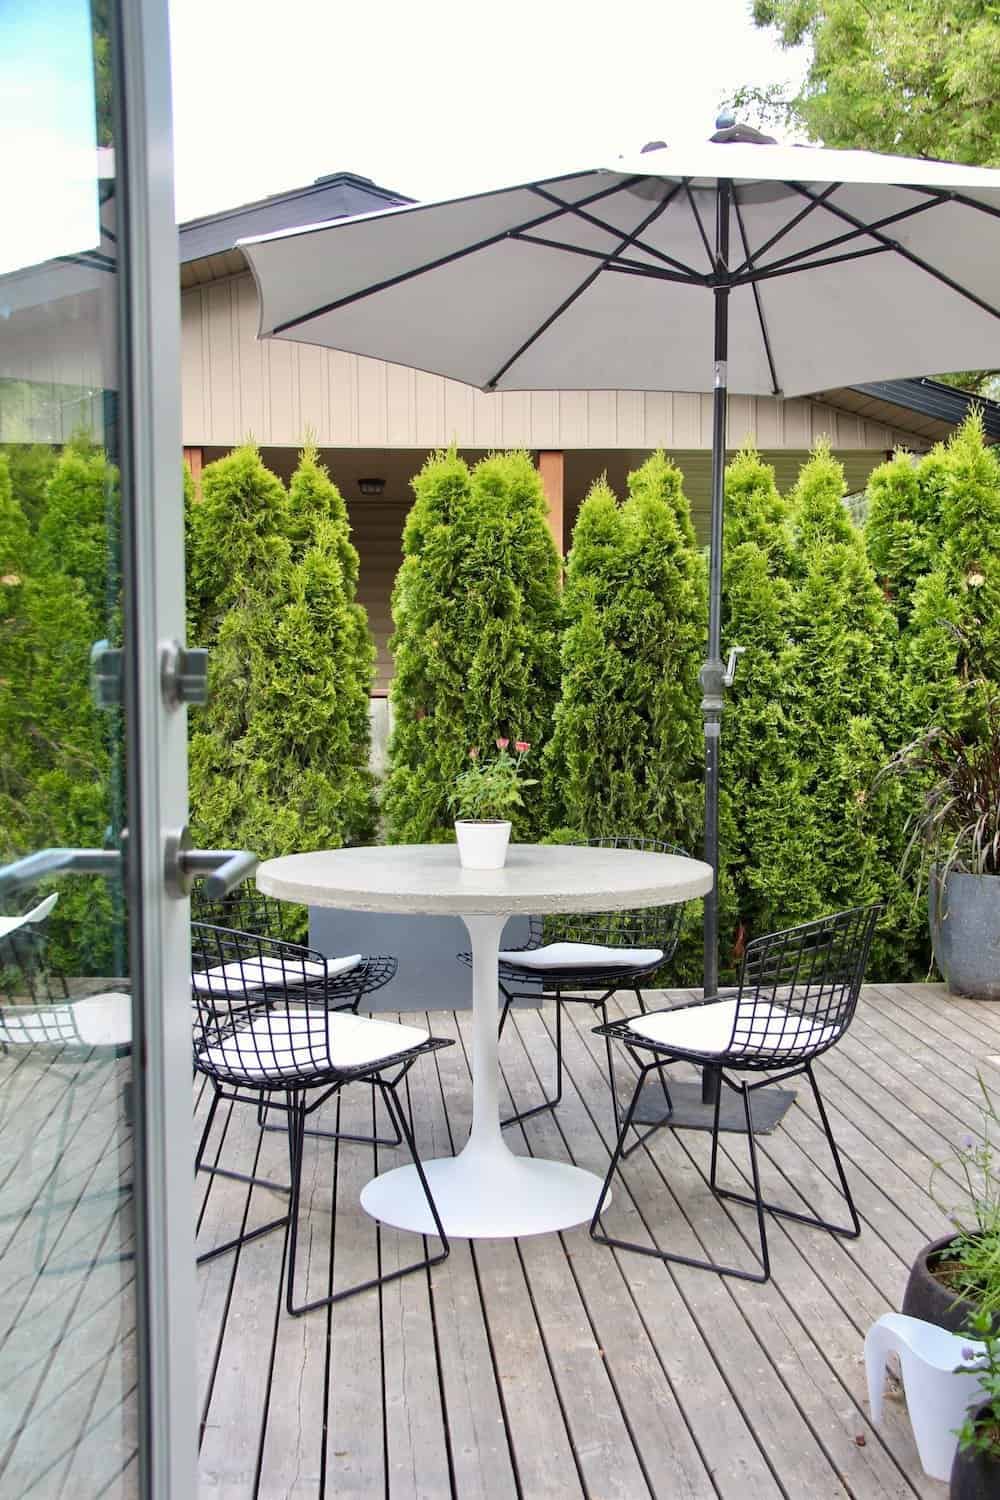 Modern patio furniture on grey wooden deck with glass door and umbrella